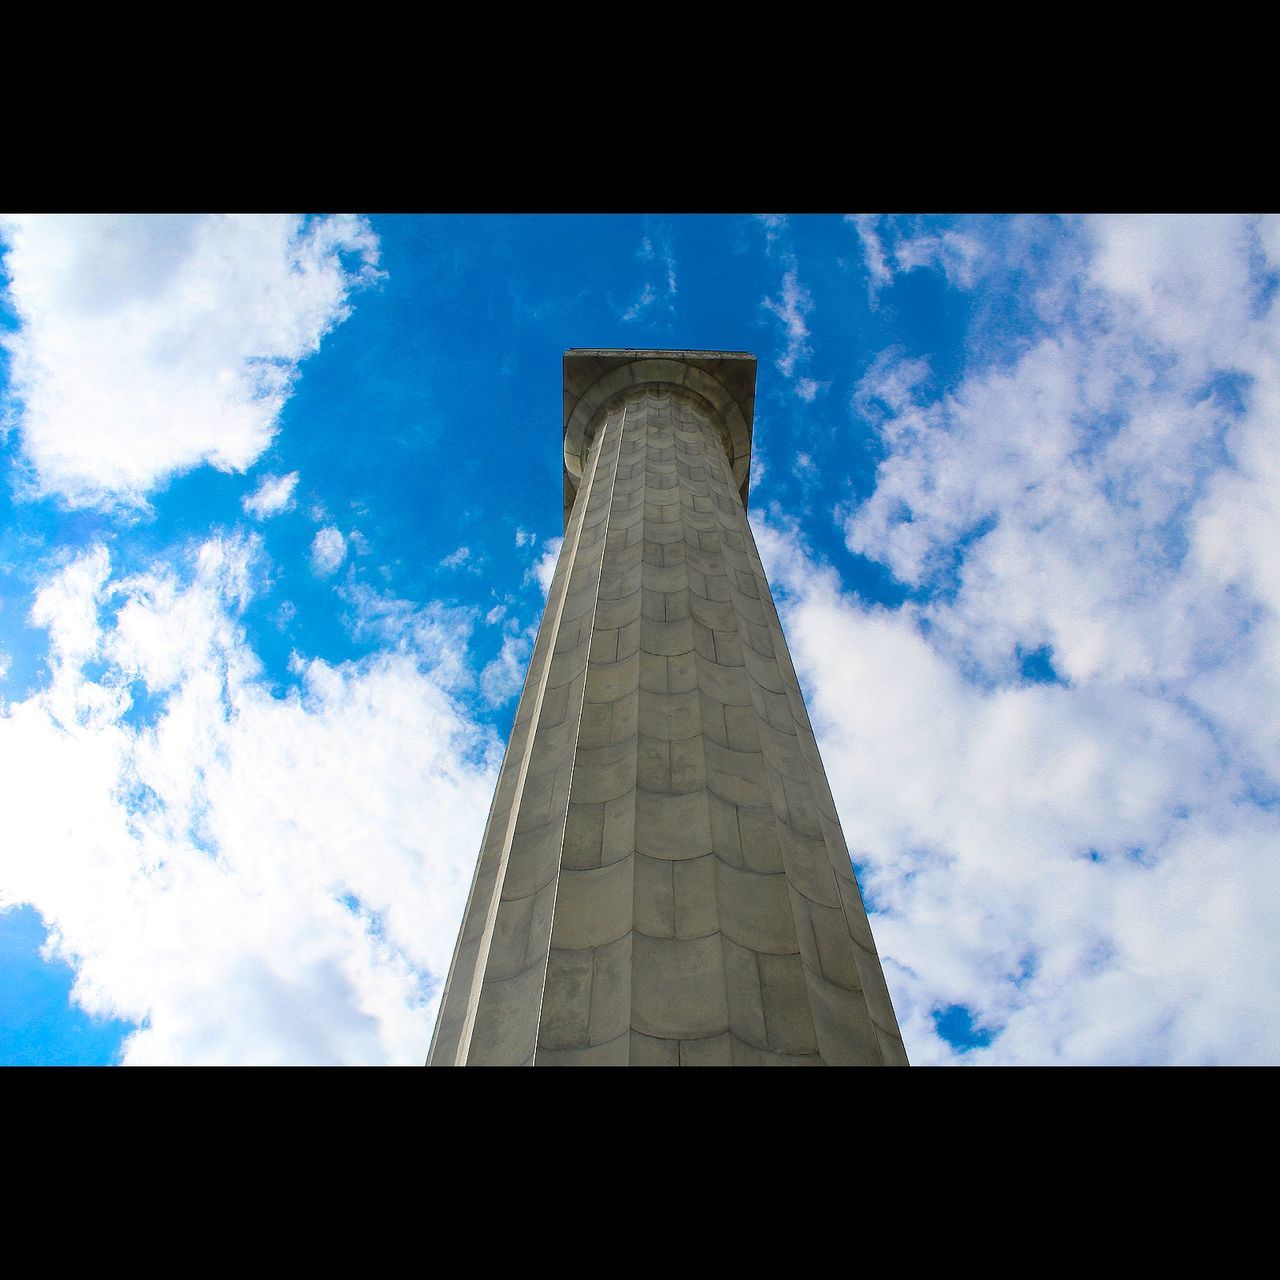 sky, low angle view, architecture, built structure, cloud - sky, monument, travel destinations, pyramid, day, history, no people, ancient, architectural column, ancient civilization, outdoors